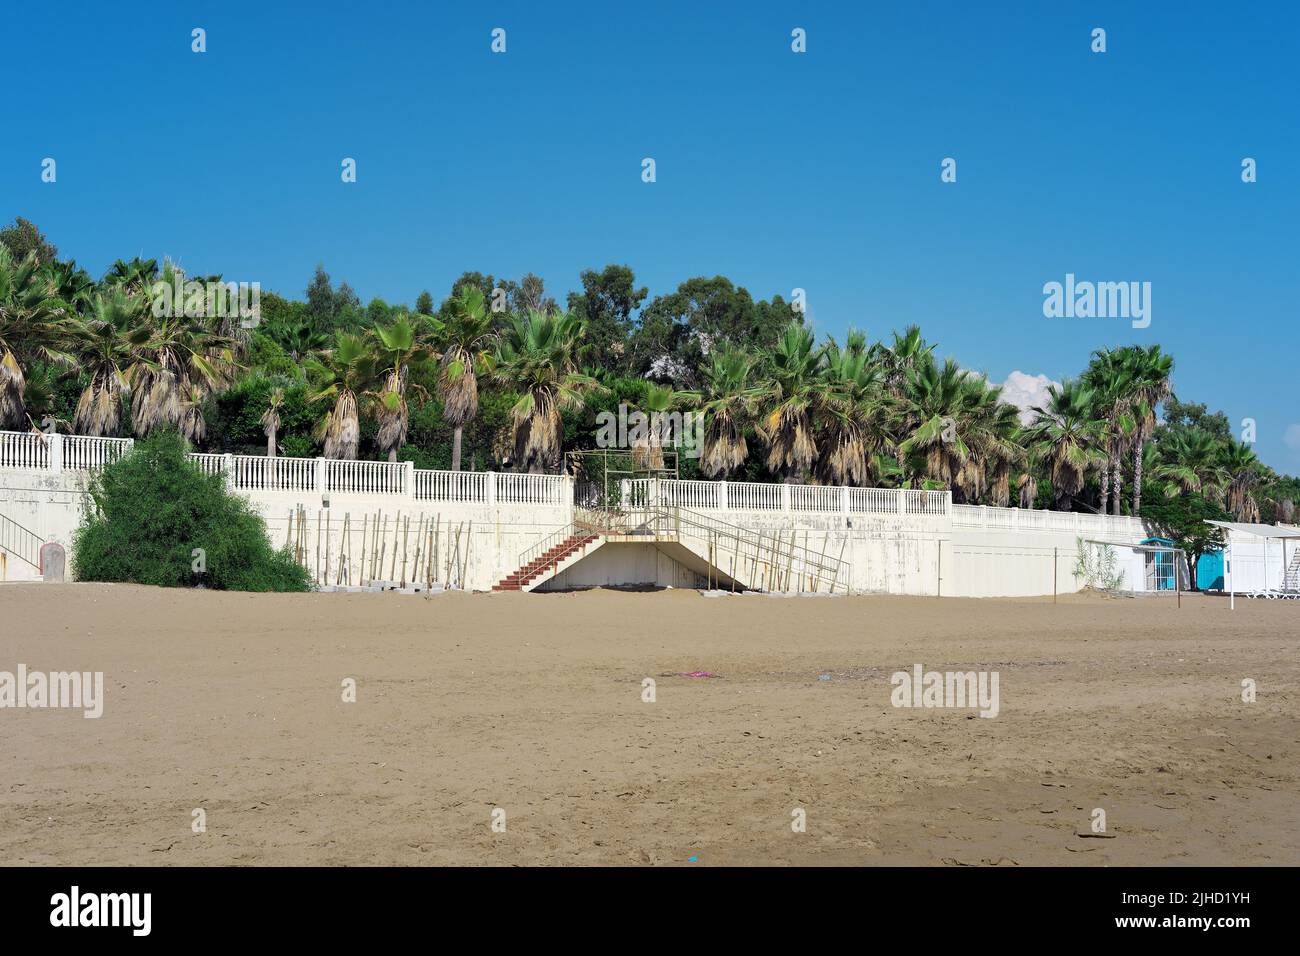 Wall at sandy beach with palm trees over it Stock Photo